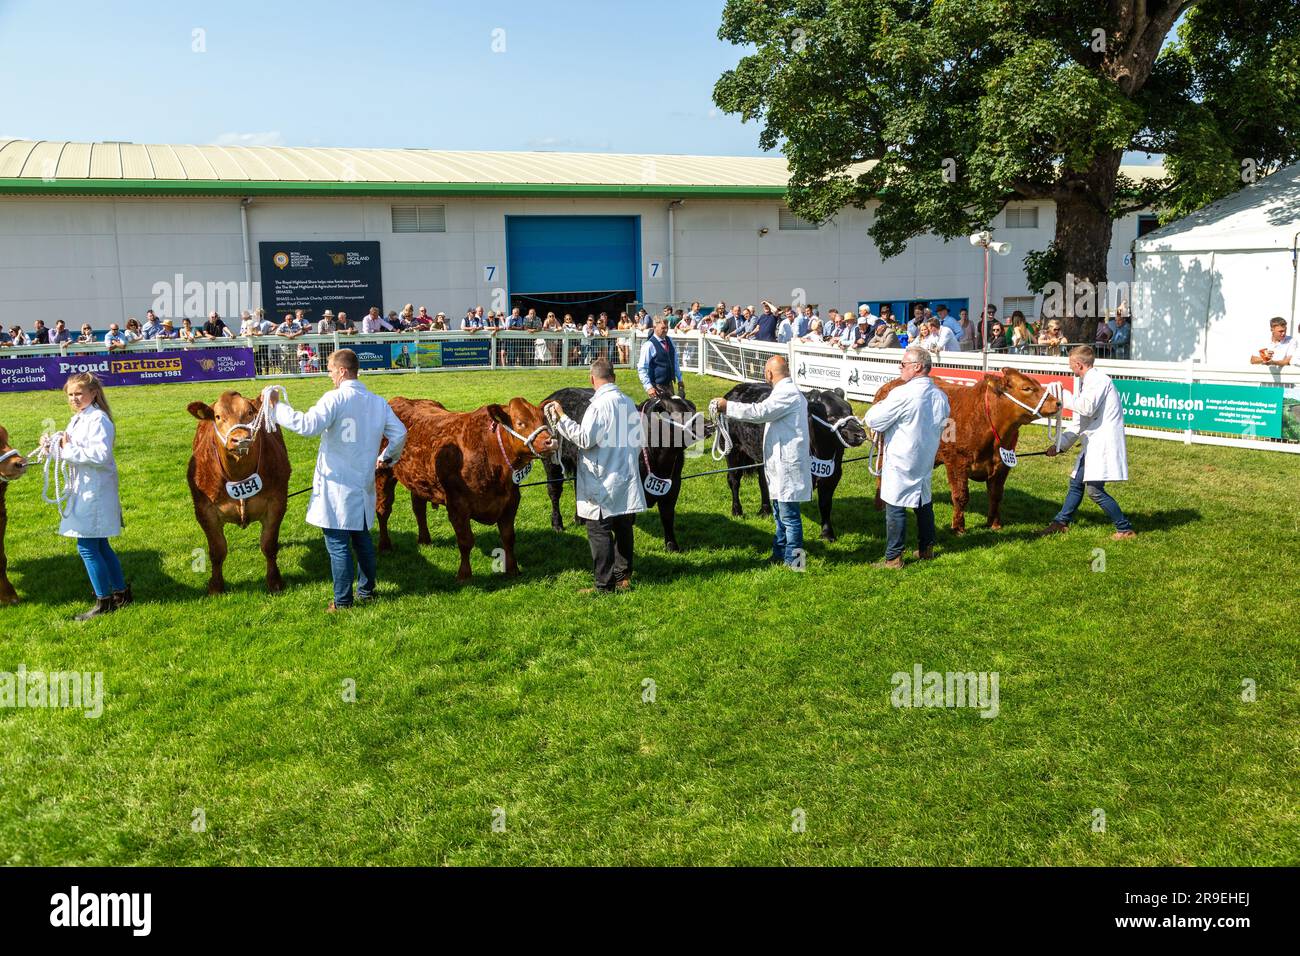 cattle being shown at the Royal Highland Show, Scotland Stock Photo